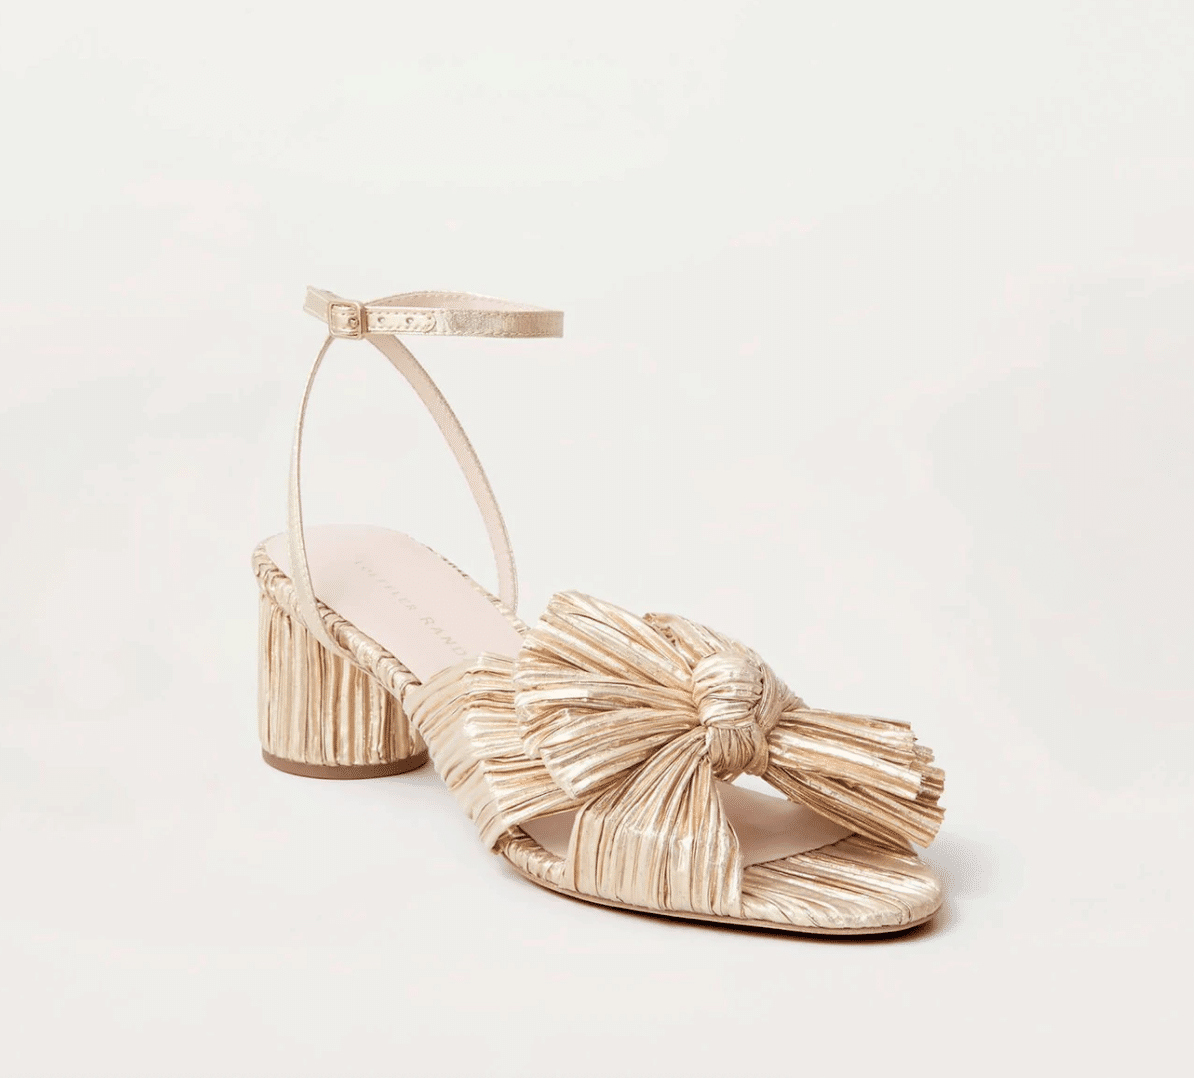 gold wedding shoes